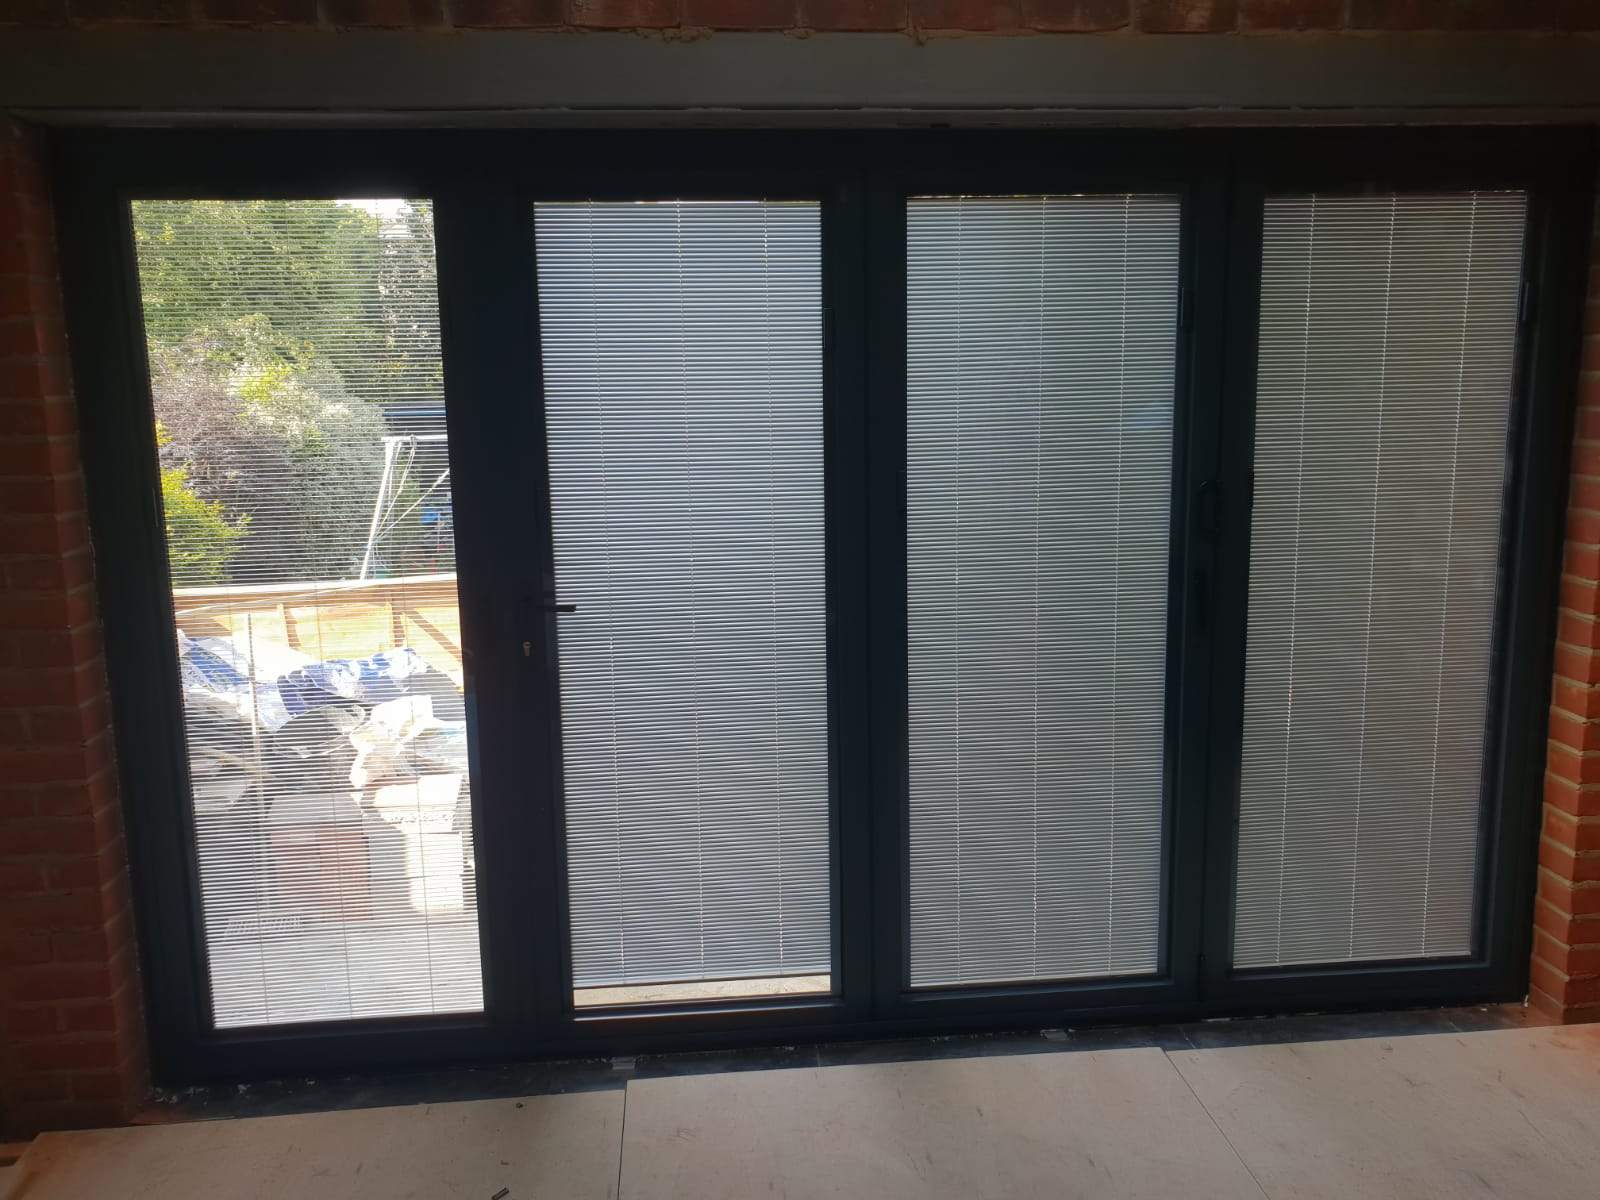 Integral blinds for privacy